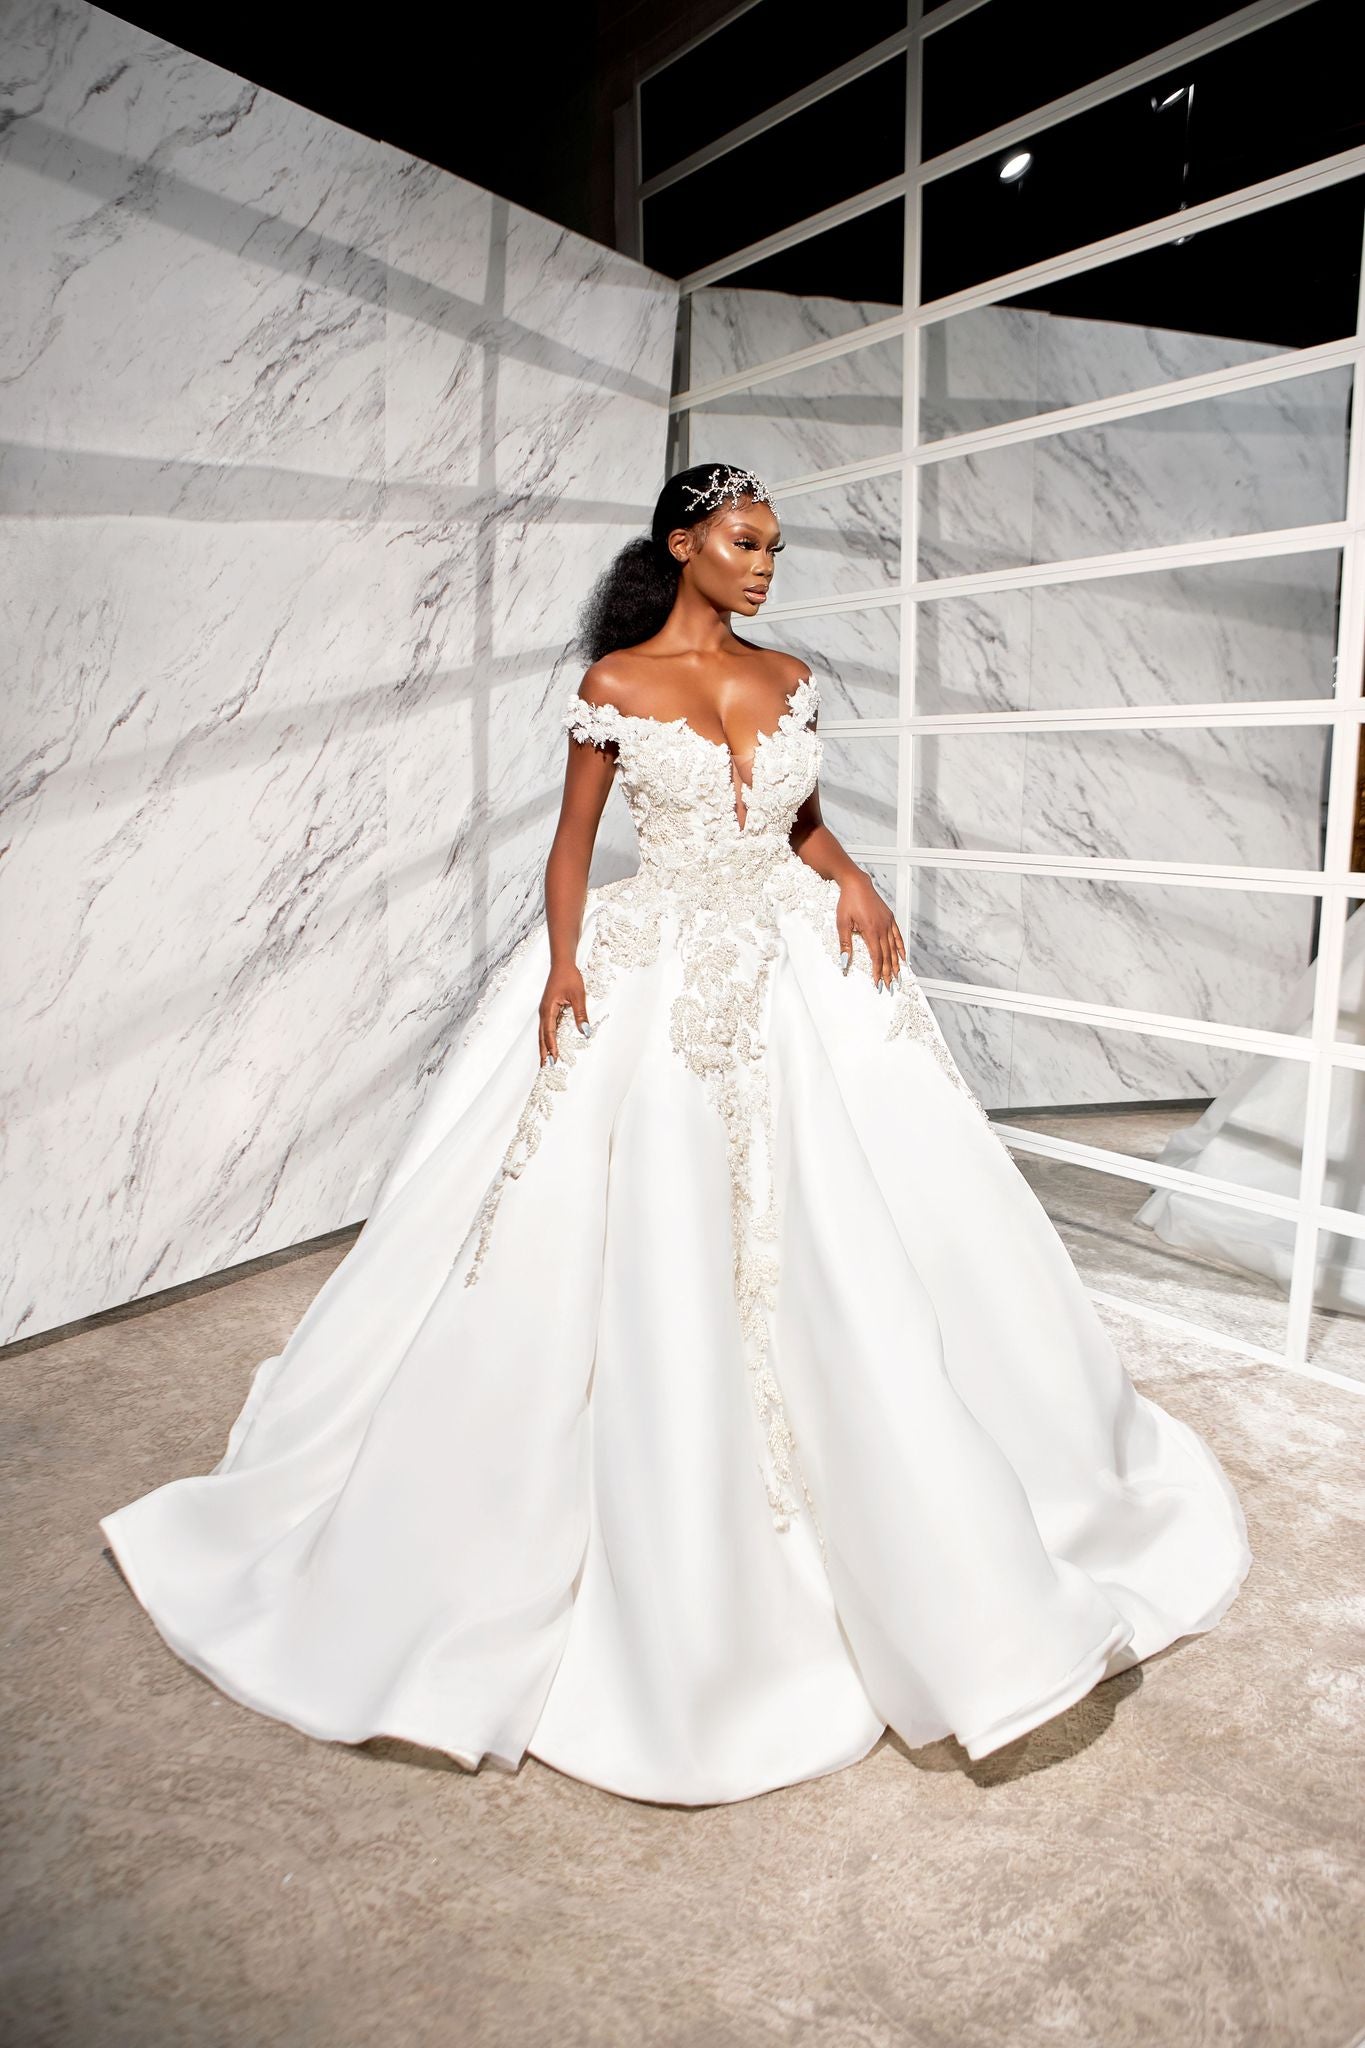 Ese Azenabor's Latest Bridal Collection Gives Hope For Brides-To-Be